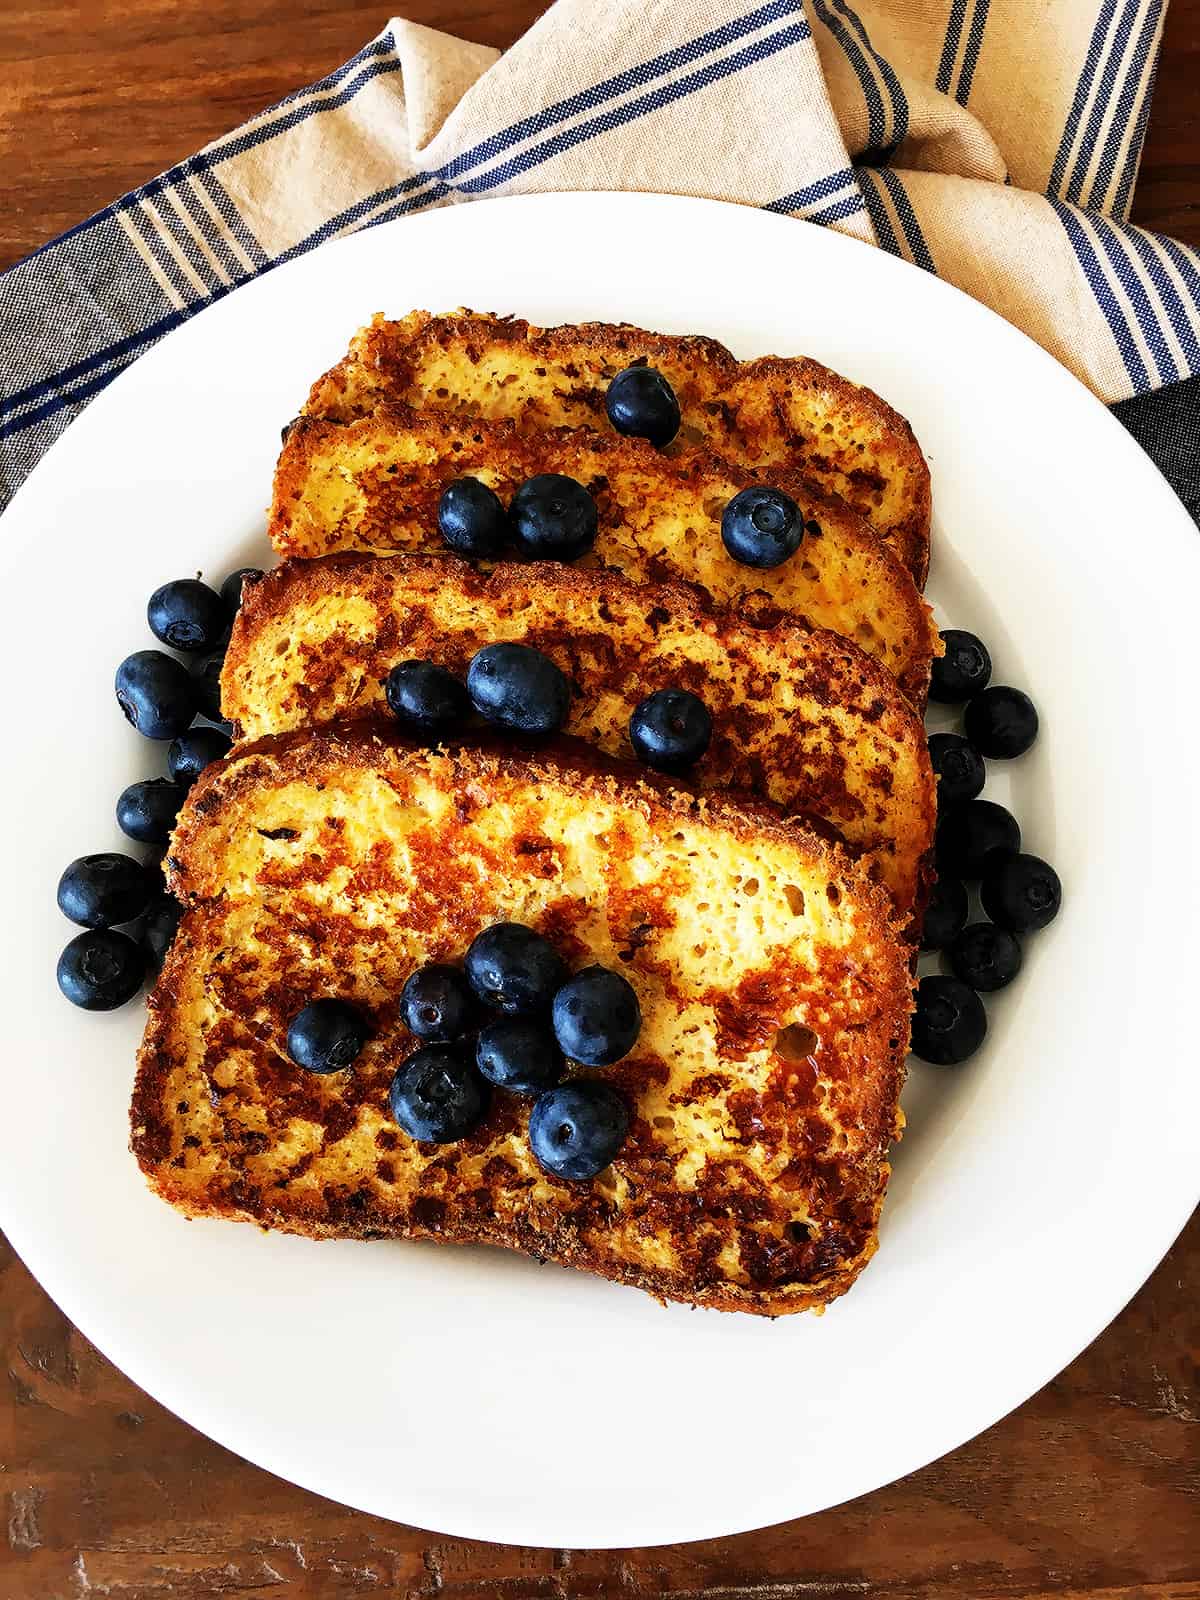 French toast with fresh blueberries on a white plate with a blue and tan plaid napkin